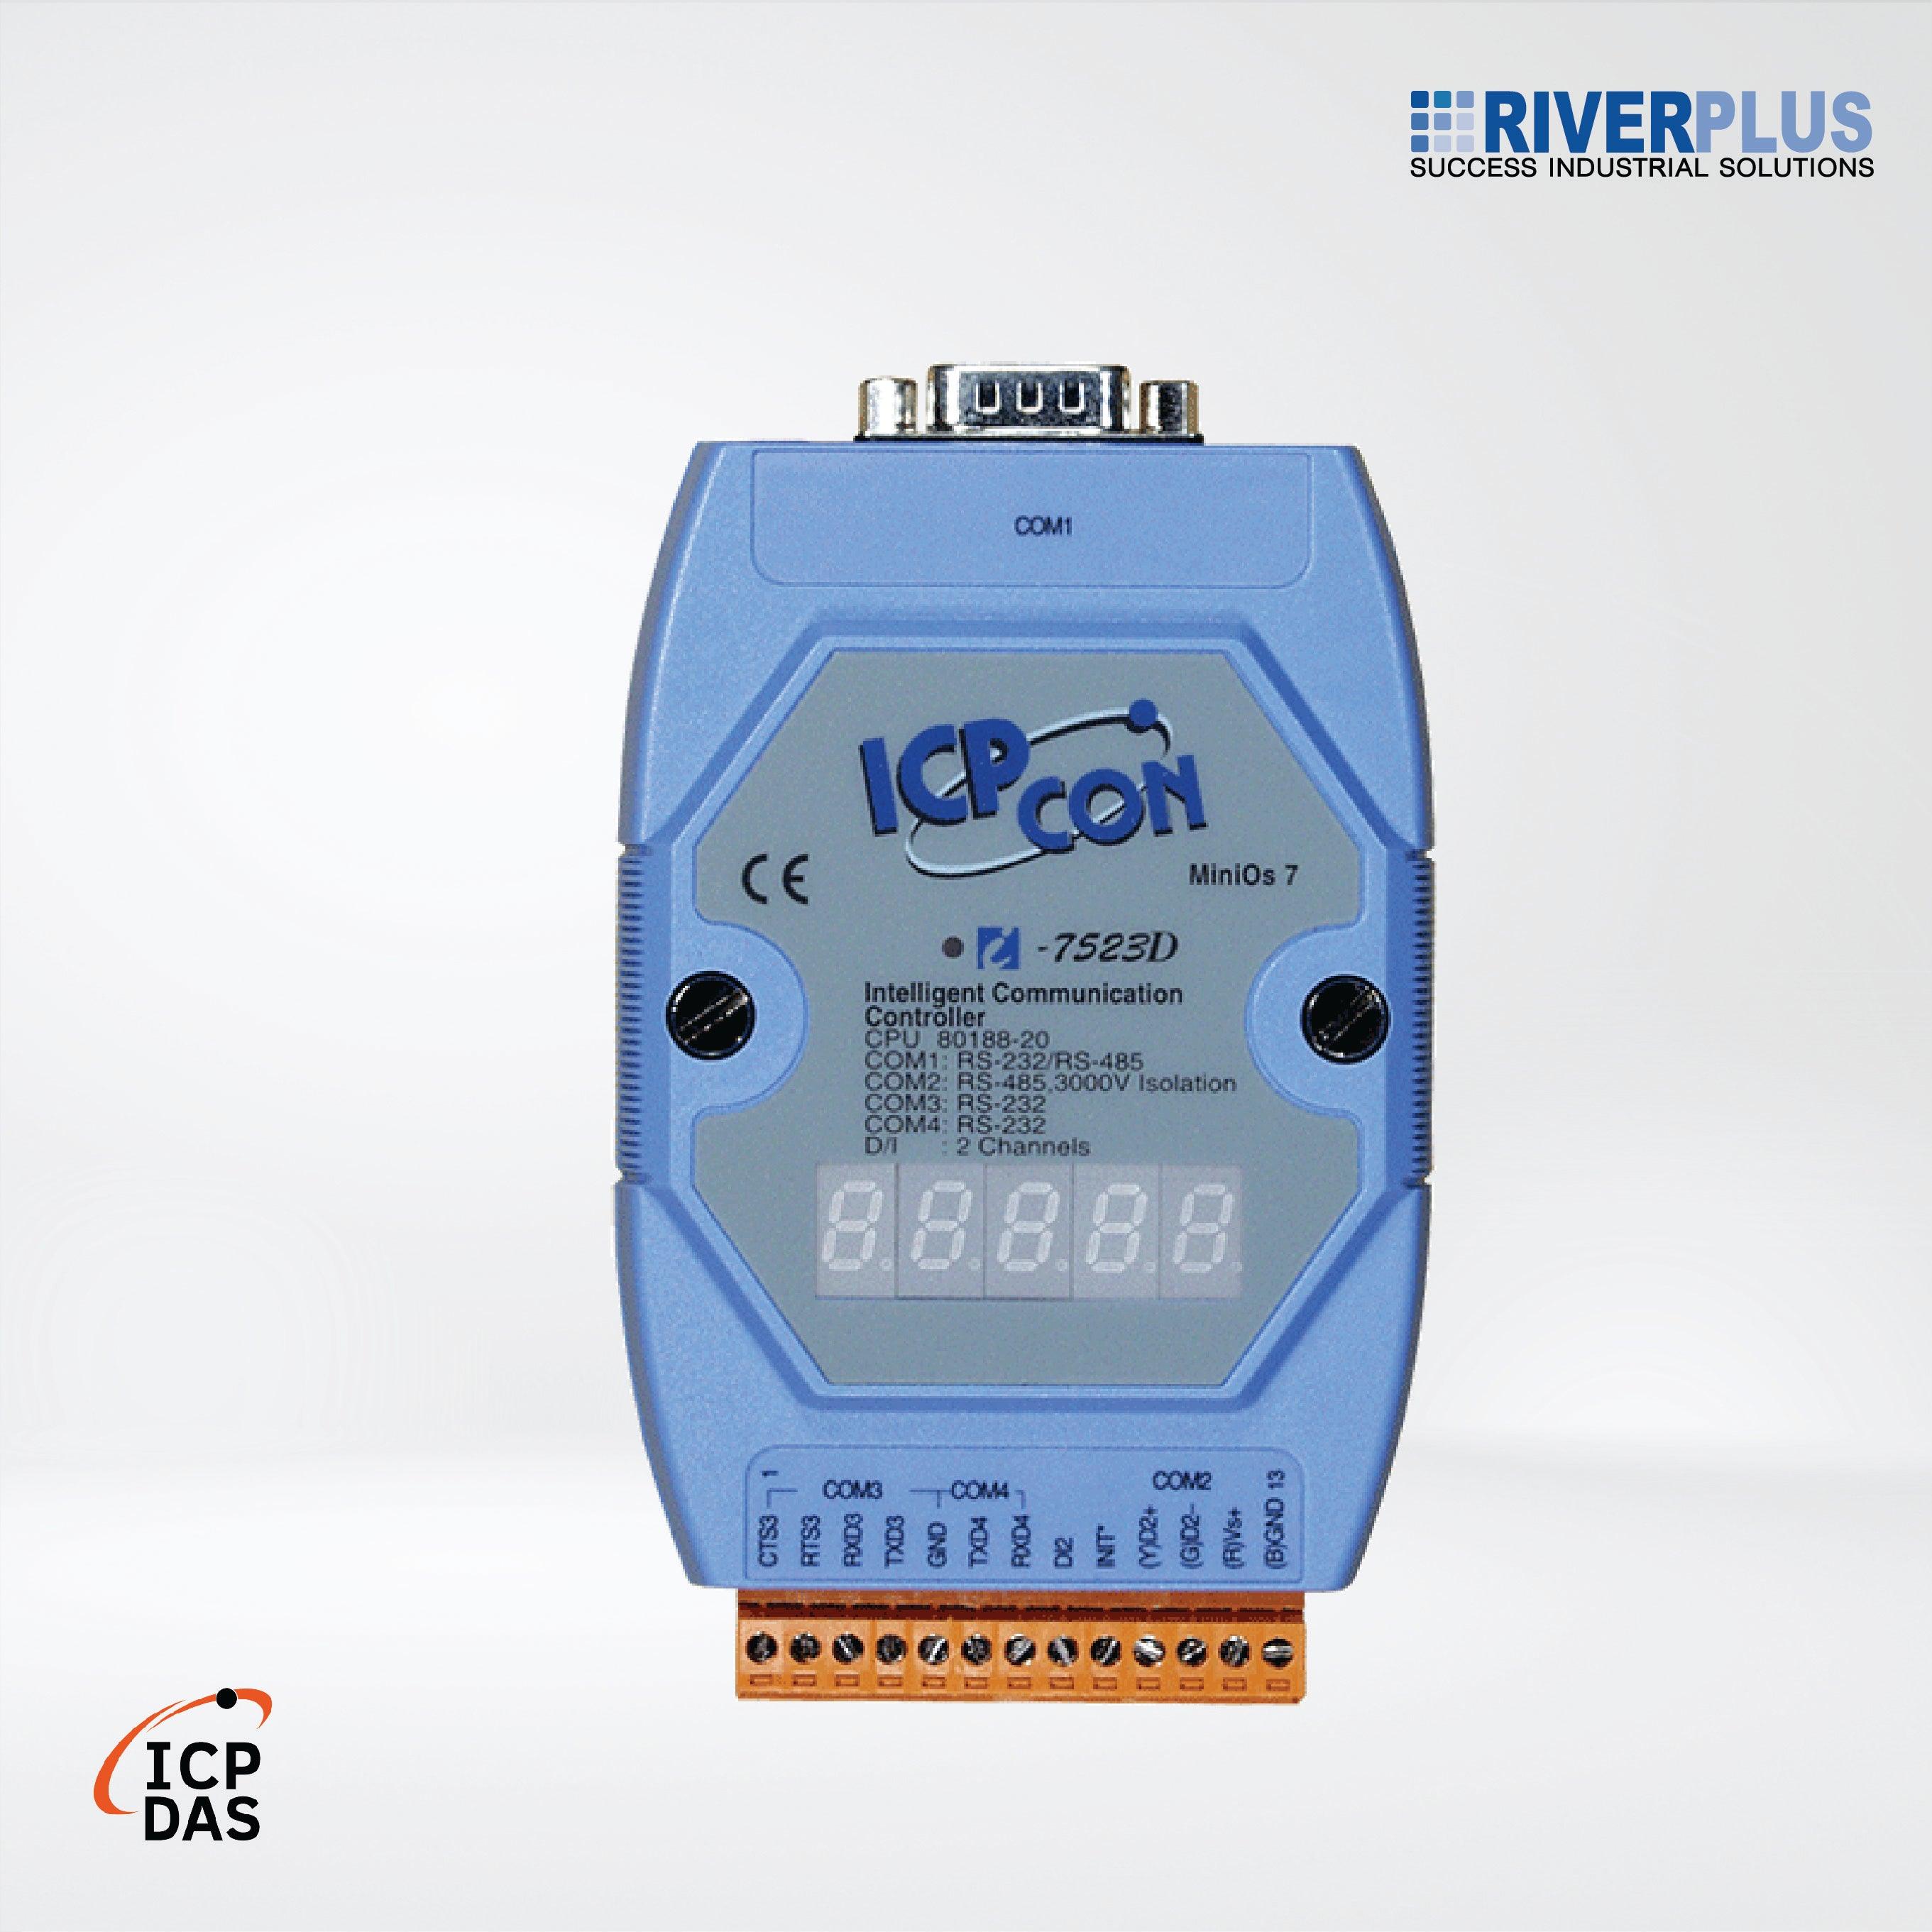 I-7523D Addressable RS-485 to 3 x RS-232/RS-485 Converter with 1 DI and 7-Segment LED Display (Blue Cover) - Riverplus